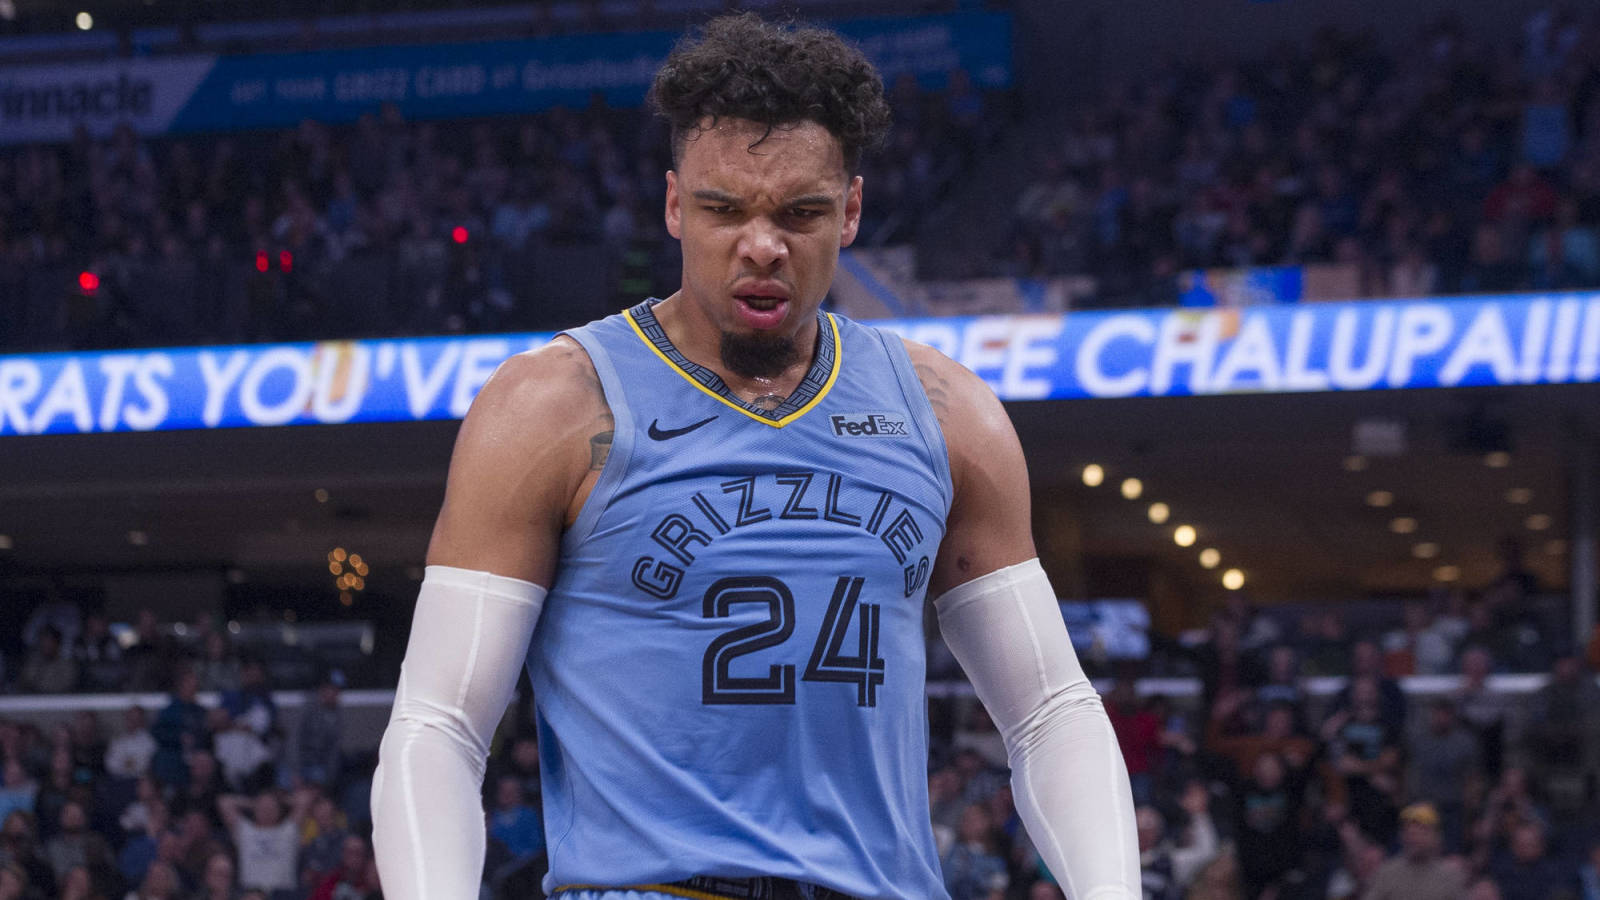 Dillon Brooks hopes to suit up for Team Canada amid potential free agency